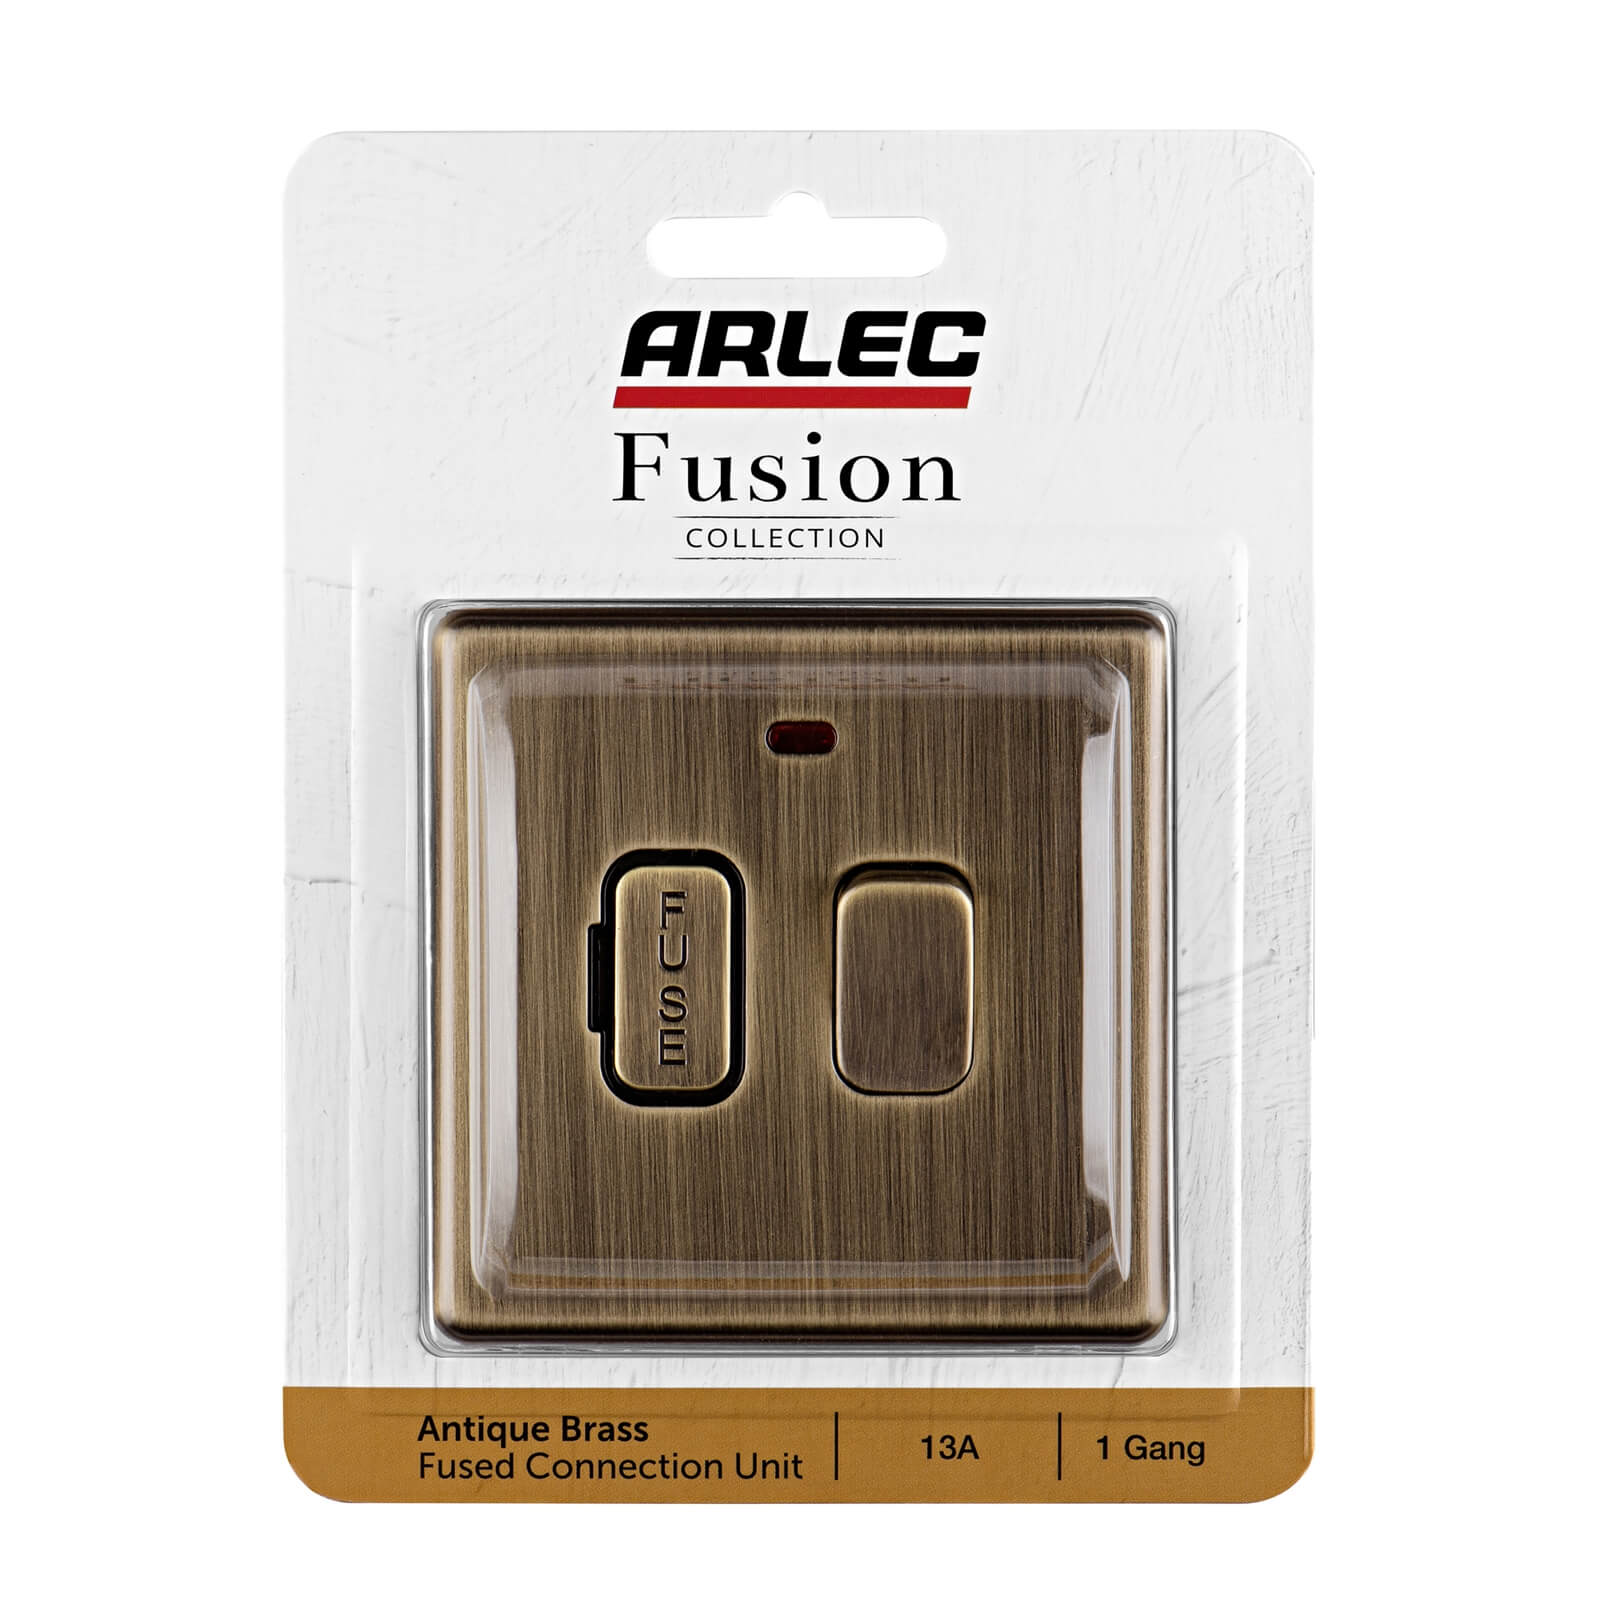 Arlec Fusion 13A Antique Brass Switched fused connection unit